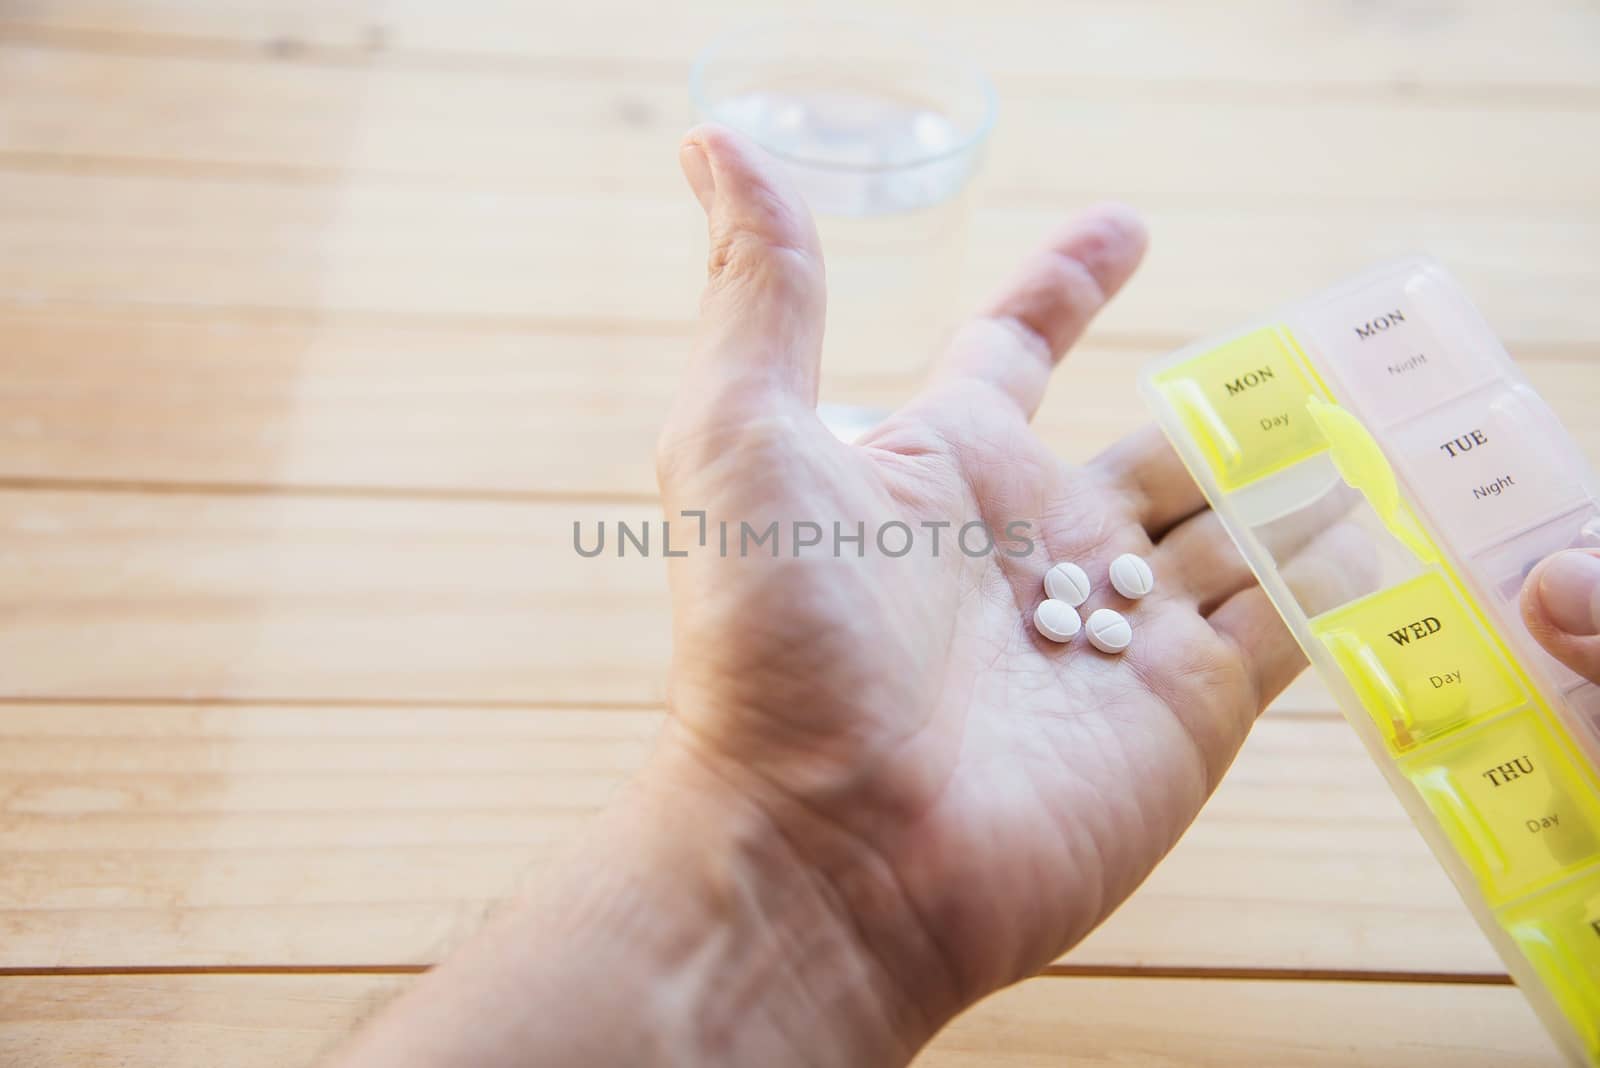 Man is going to eat medicine tablet - people with medical health problem concept by pairhandmade